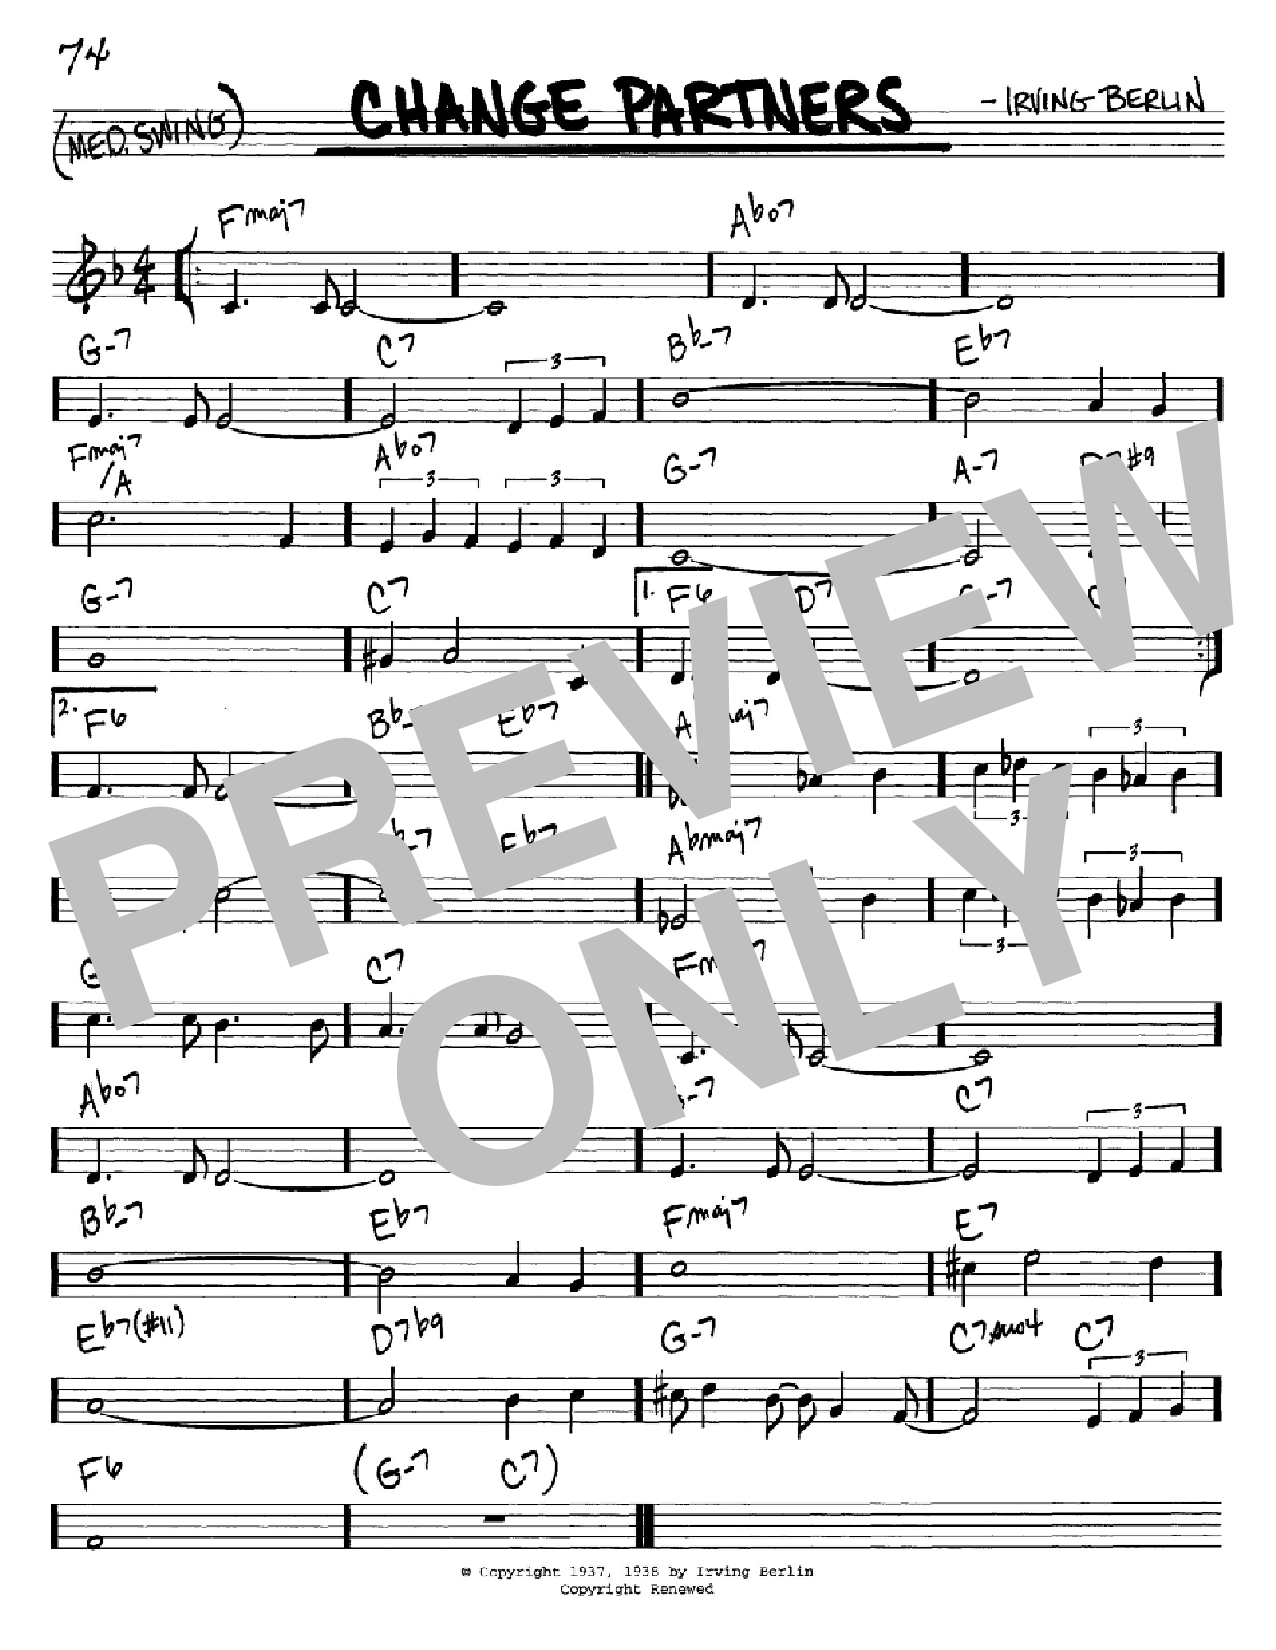 Irving Berlin Change Partners sheet music notes and chords. Download Printable PDF.